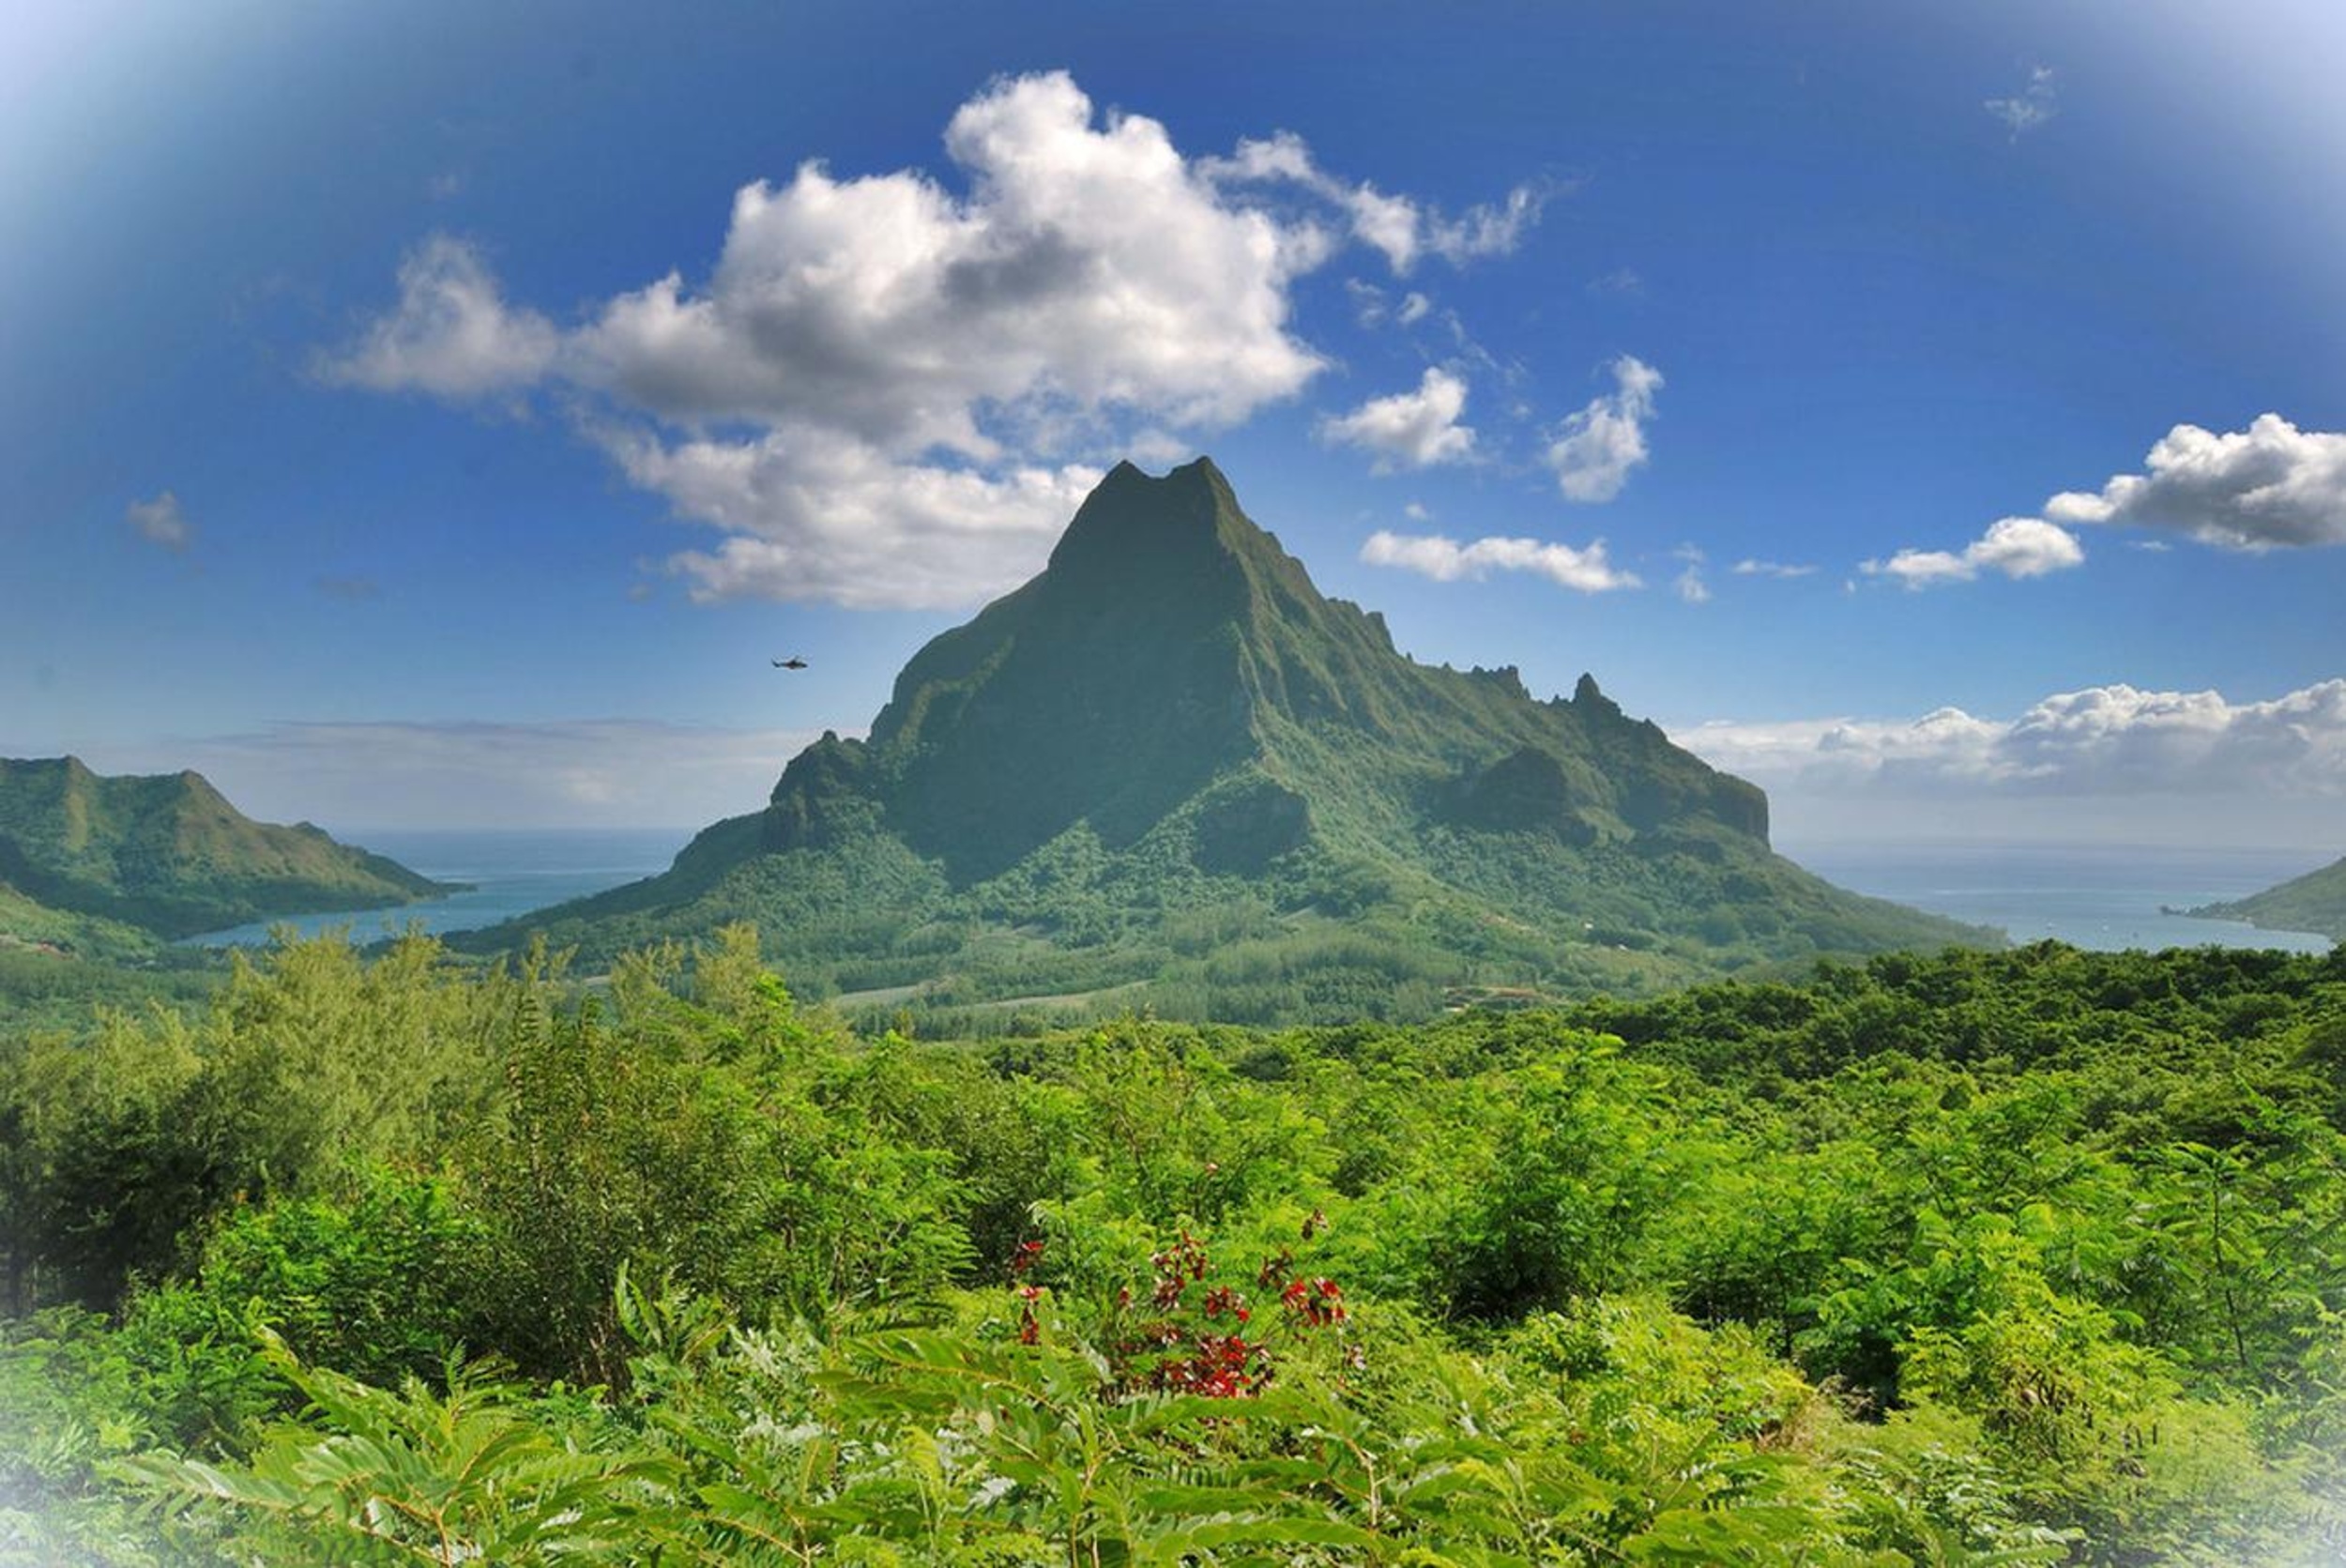 <p>Sticking to our Moorea getaway, take a car through the mountains for a view of the ocean. Belvedere is one of those lookouts that makes your jaw drop. It boasts panoramic views of the island—with two mountains on either side like an open door to the sea. </p><p><a href='https://www.msn.com/en-us/community/channel/vid-cj9pqbr0vn9in2b6ddcd8sfgpfq6x6utp44fssrv6mc2gtybw0us'>Follow us on MSN to see more of our exclusive lifestyle content.</a></p>